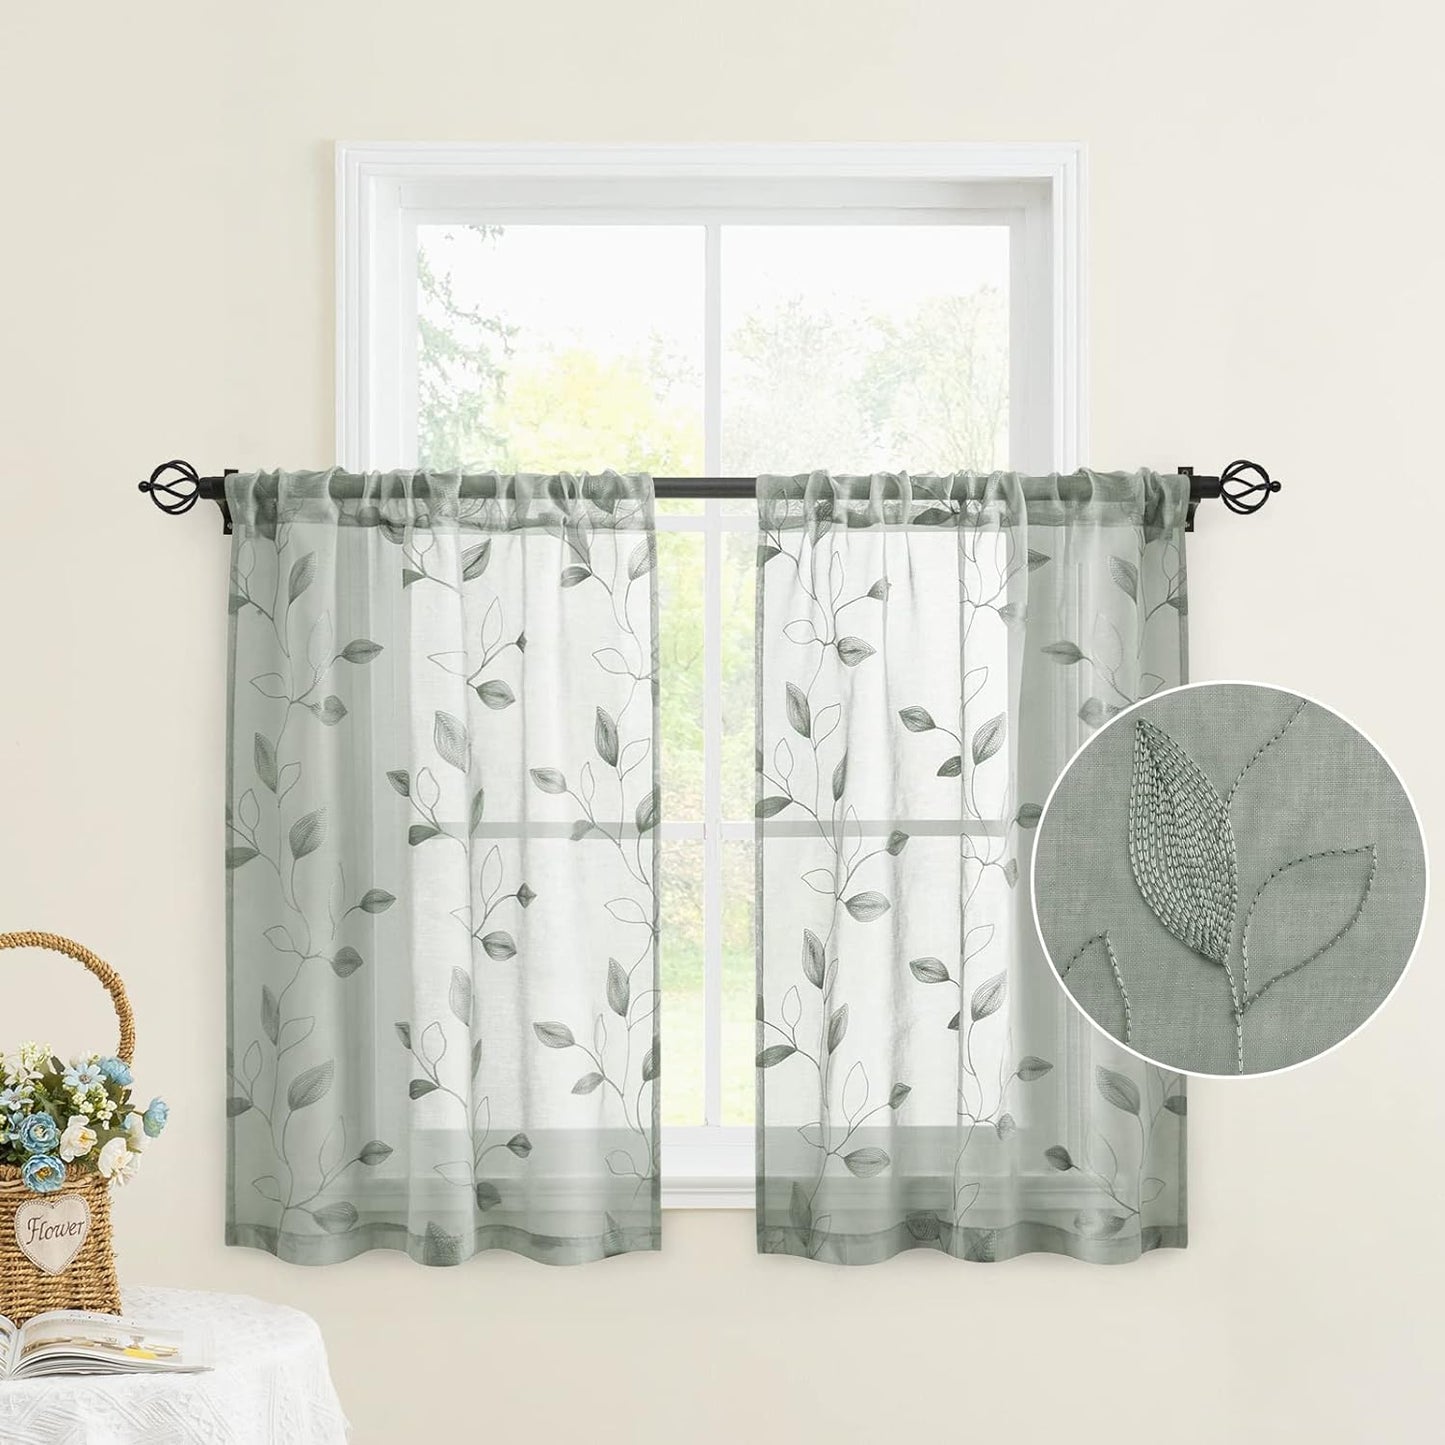 HOMEIDEAS Sage Green Sheer Curtains 52 X 63 Inches Length 2 Panels Embroidered Leaf Pattern Pocket Faux Linen Floral Semi Sheer Voile Window Curtains/Drapes for Bedroom Living Room  HOMEIDEAS 1-Sage Green W30" X L36" 